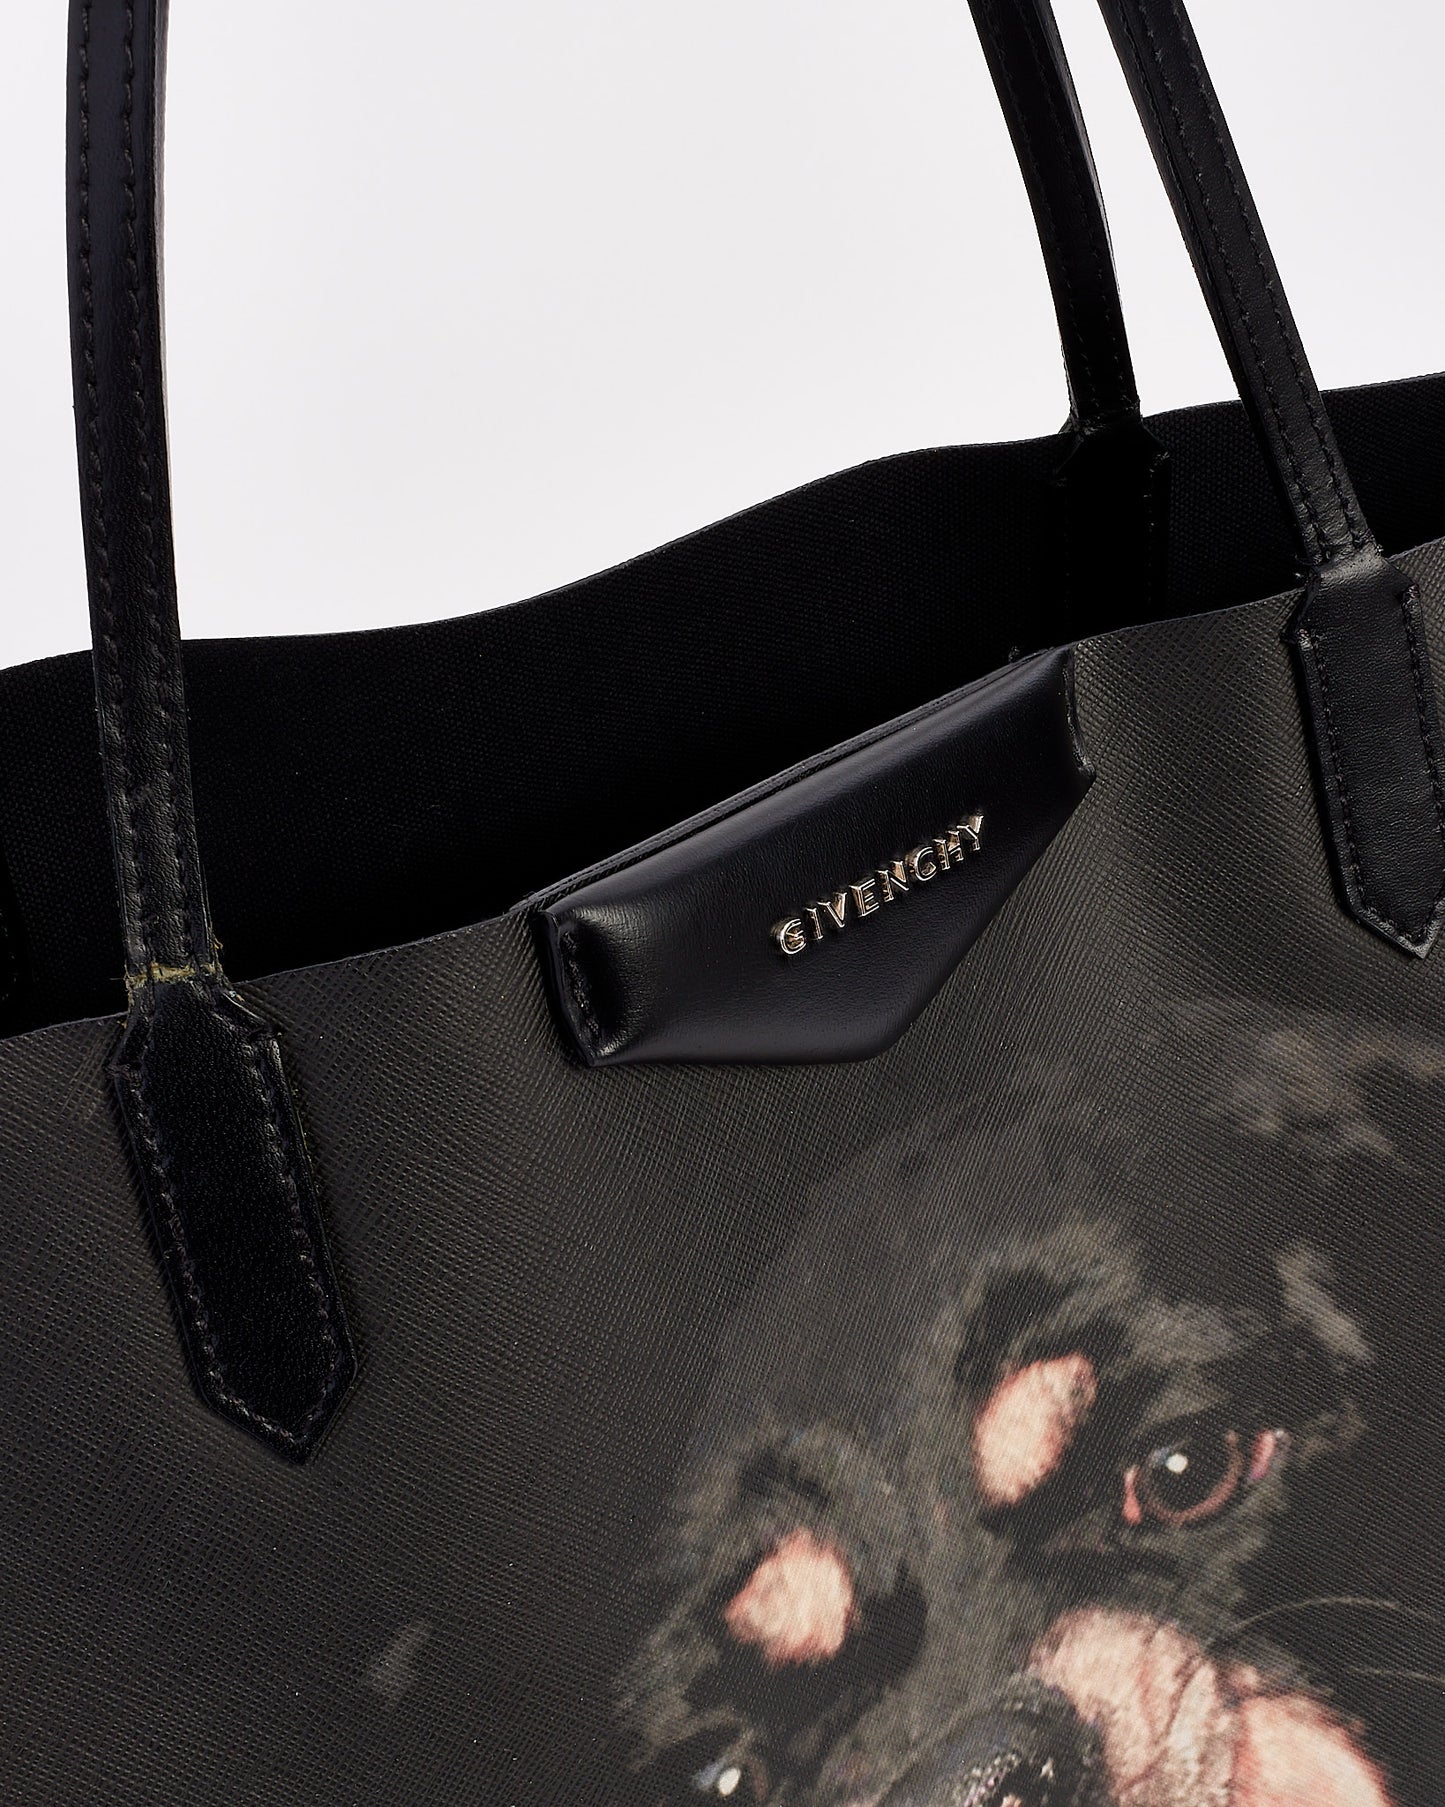 Givenchy Black Coated Canvas Rottweiler Large Tote Bag